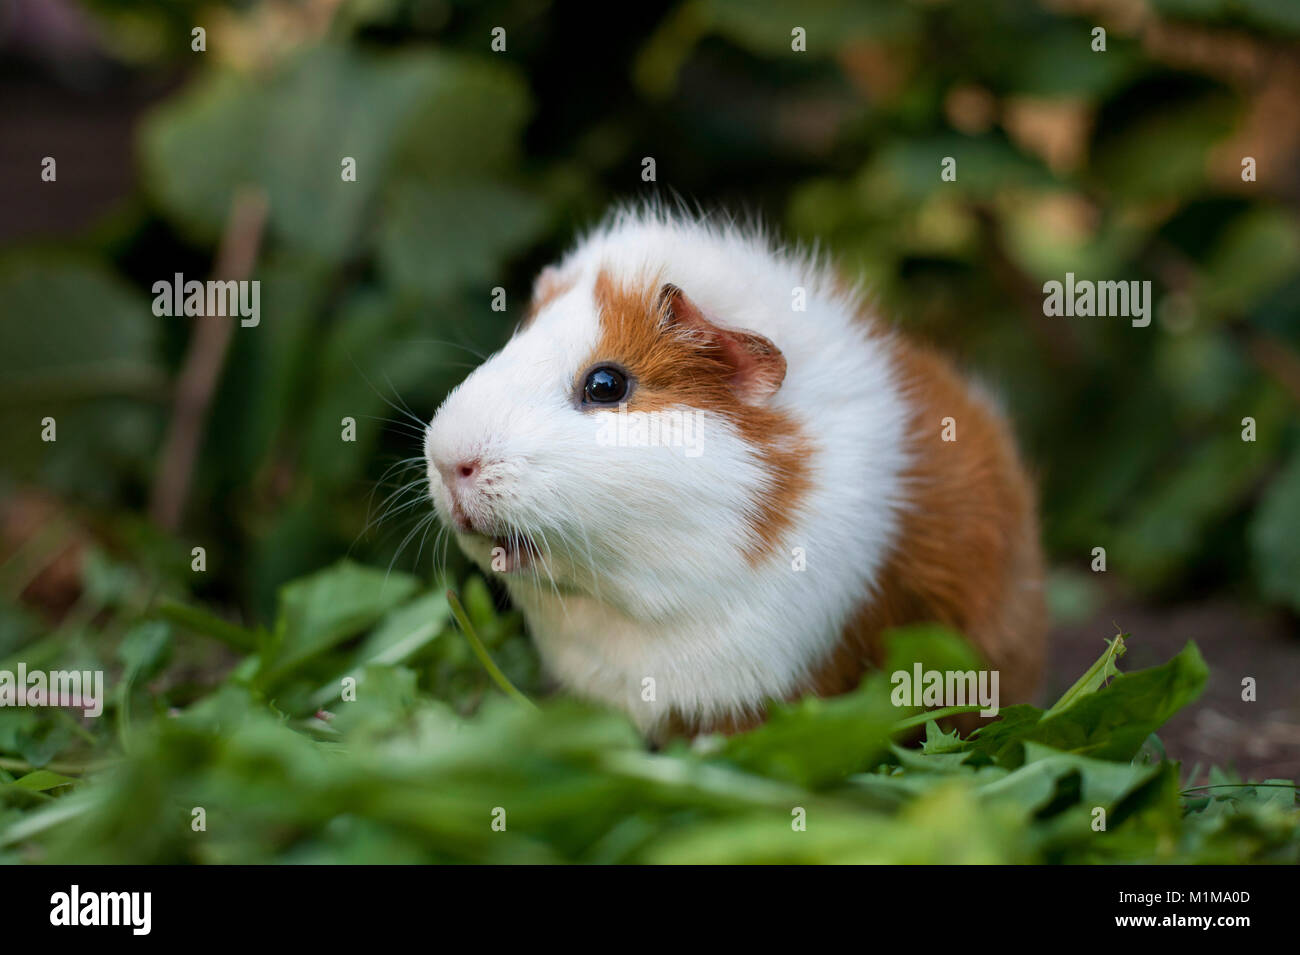 Smooth-haired Guinea Pig in an outdoor enclosure, eating Dandelion leaves. Germany. Stock Photo